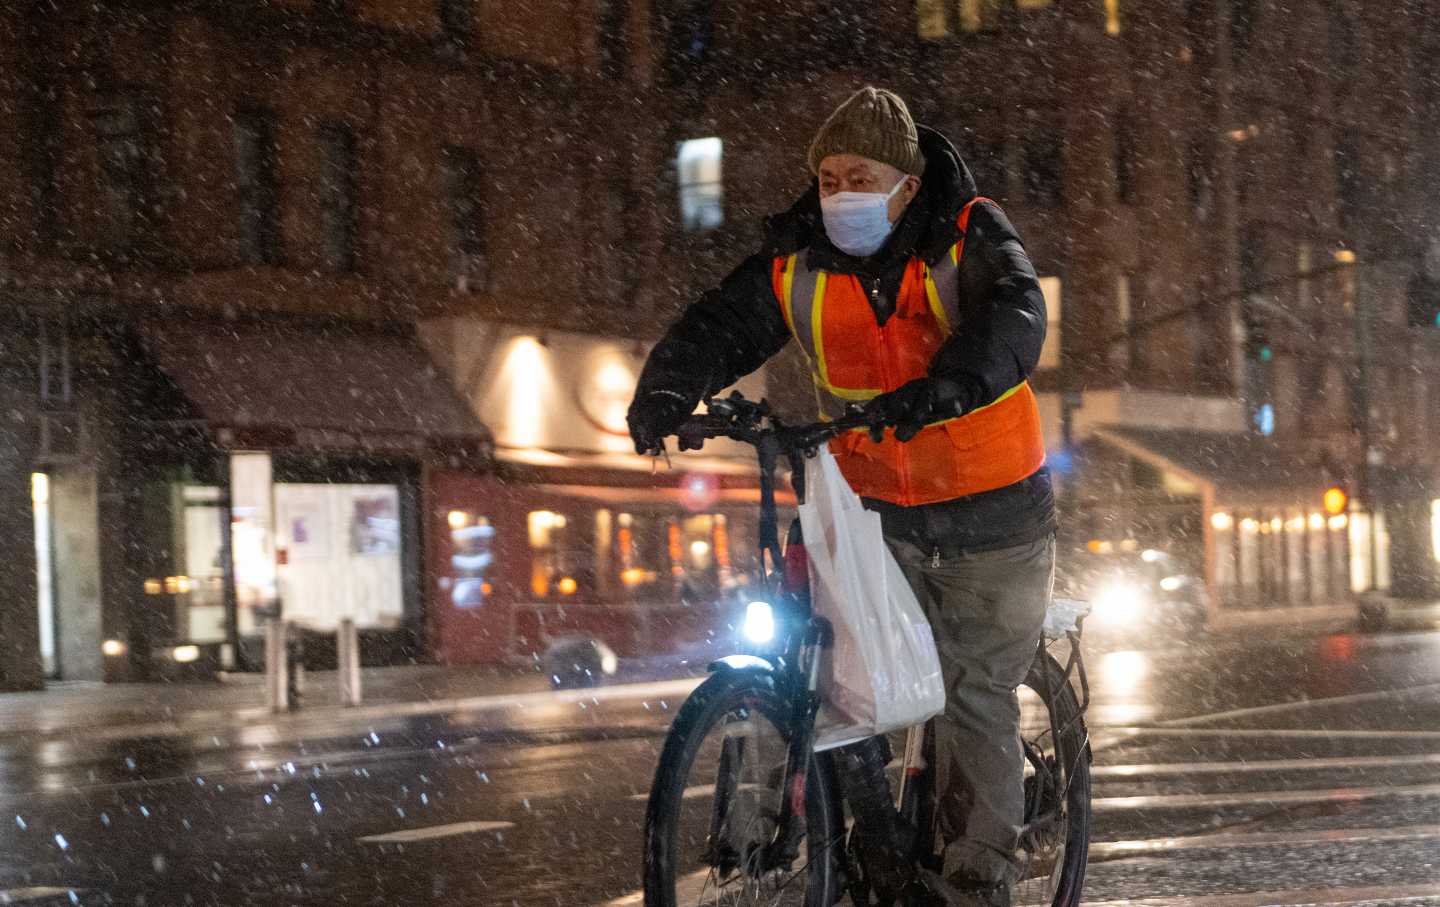 A food delivery driver on a bicycle rides in the snow on January 28, 2022 in New York City.